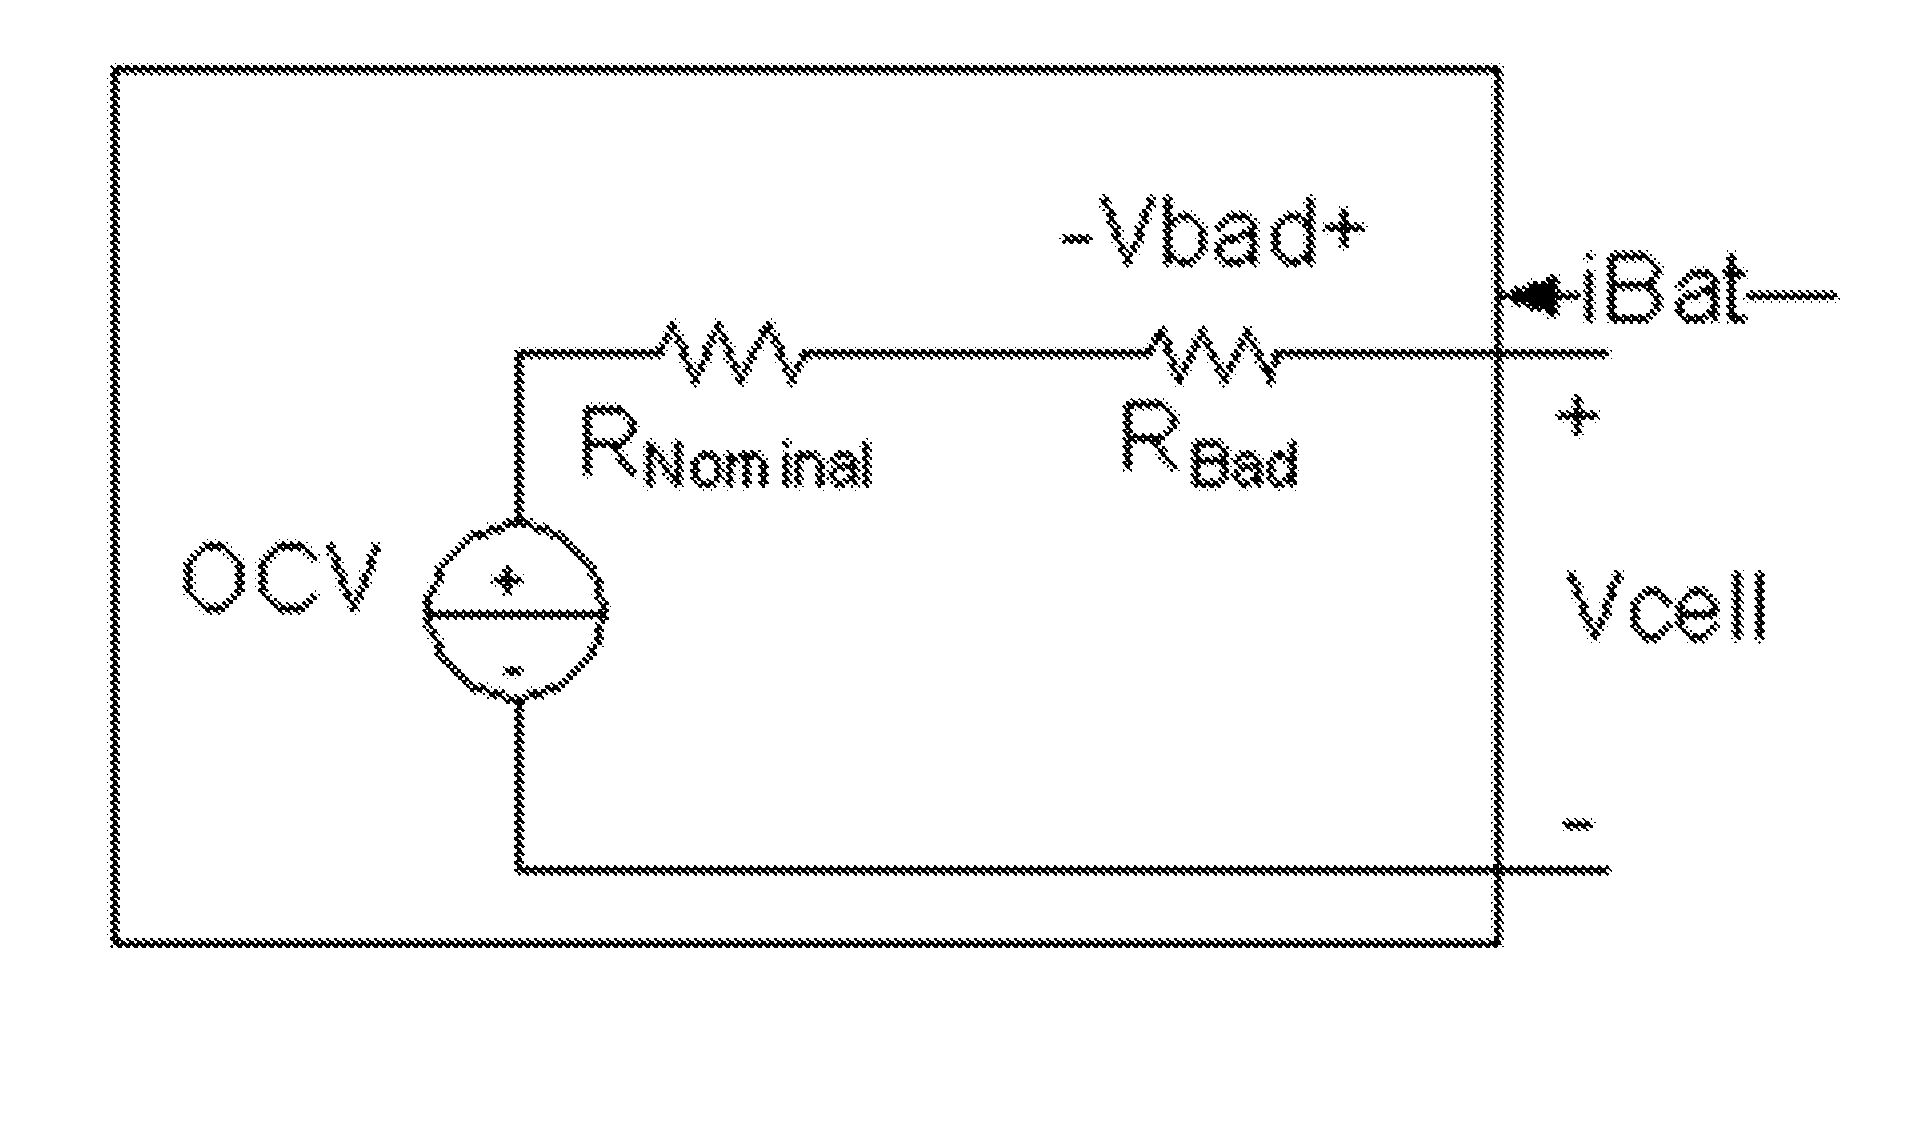 Fast charging of battery using adjustable voltage control